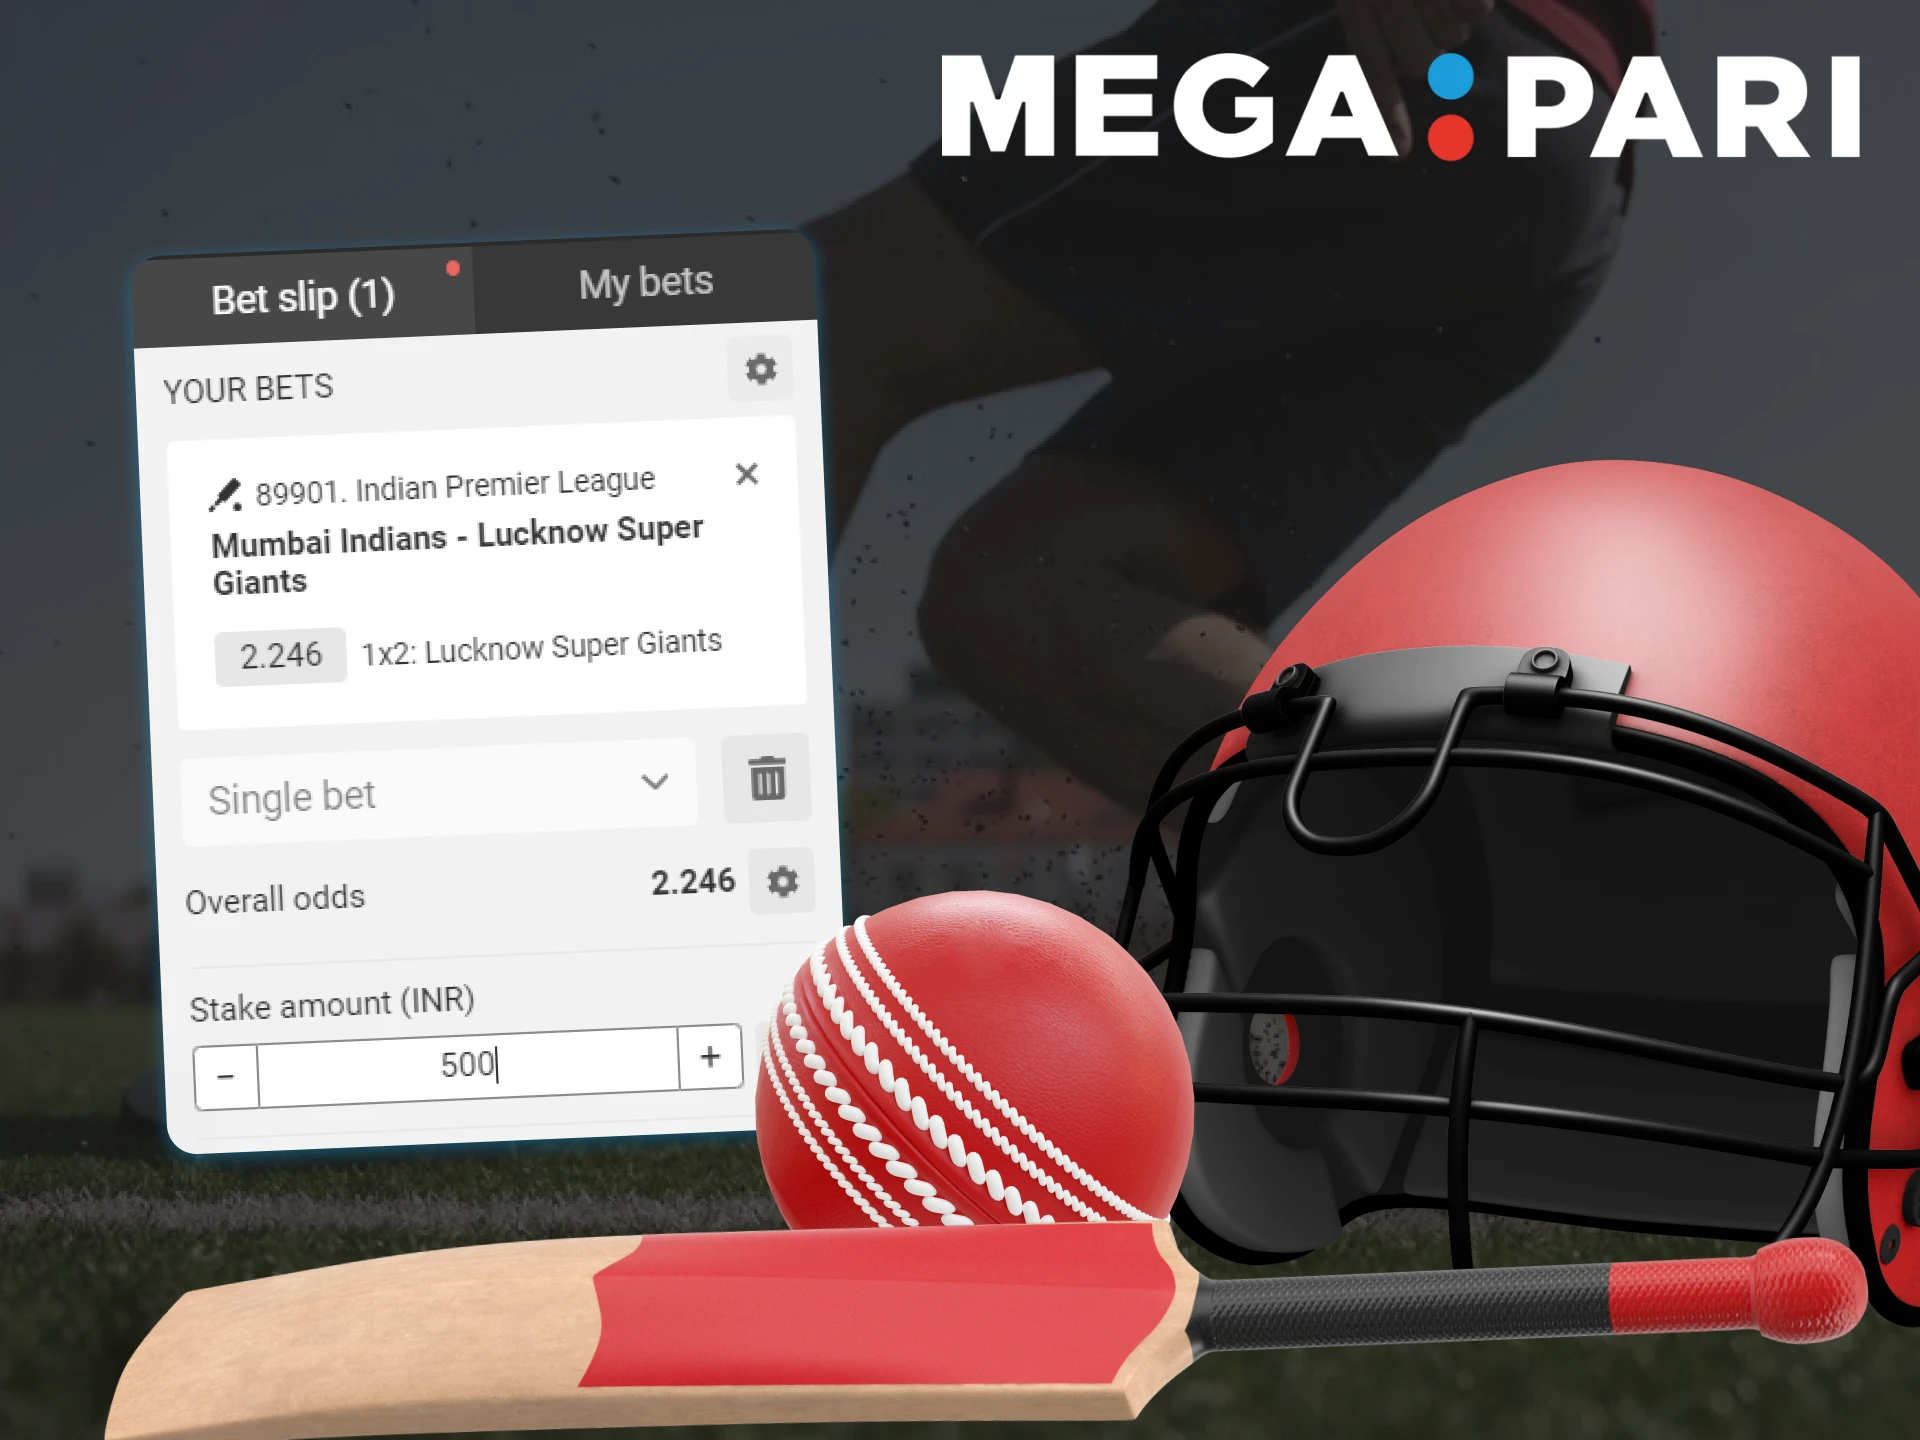 Follow the simple instructions to find out how to start betting on Megapari website and get your first winnings.